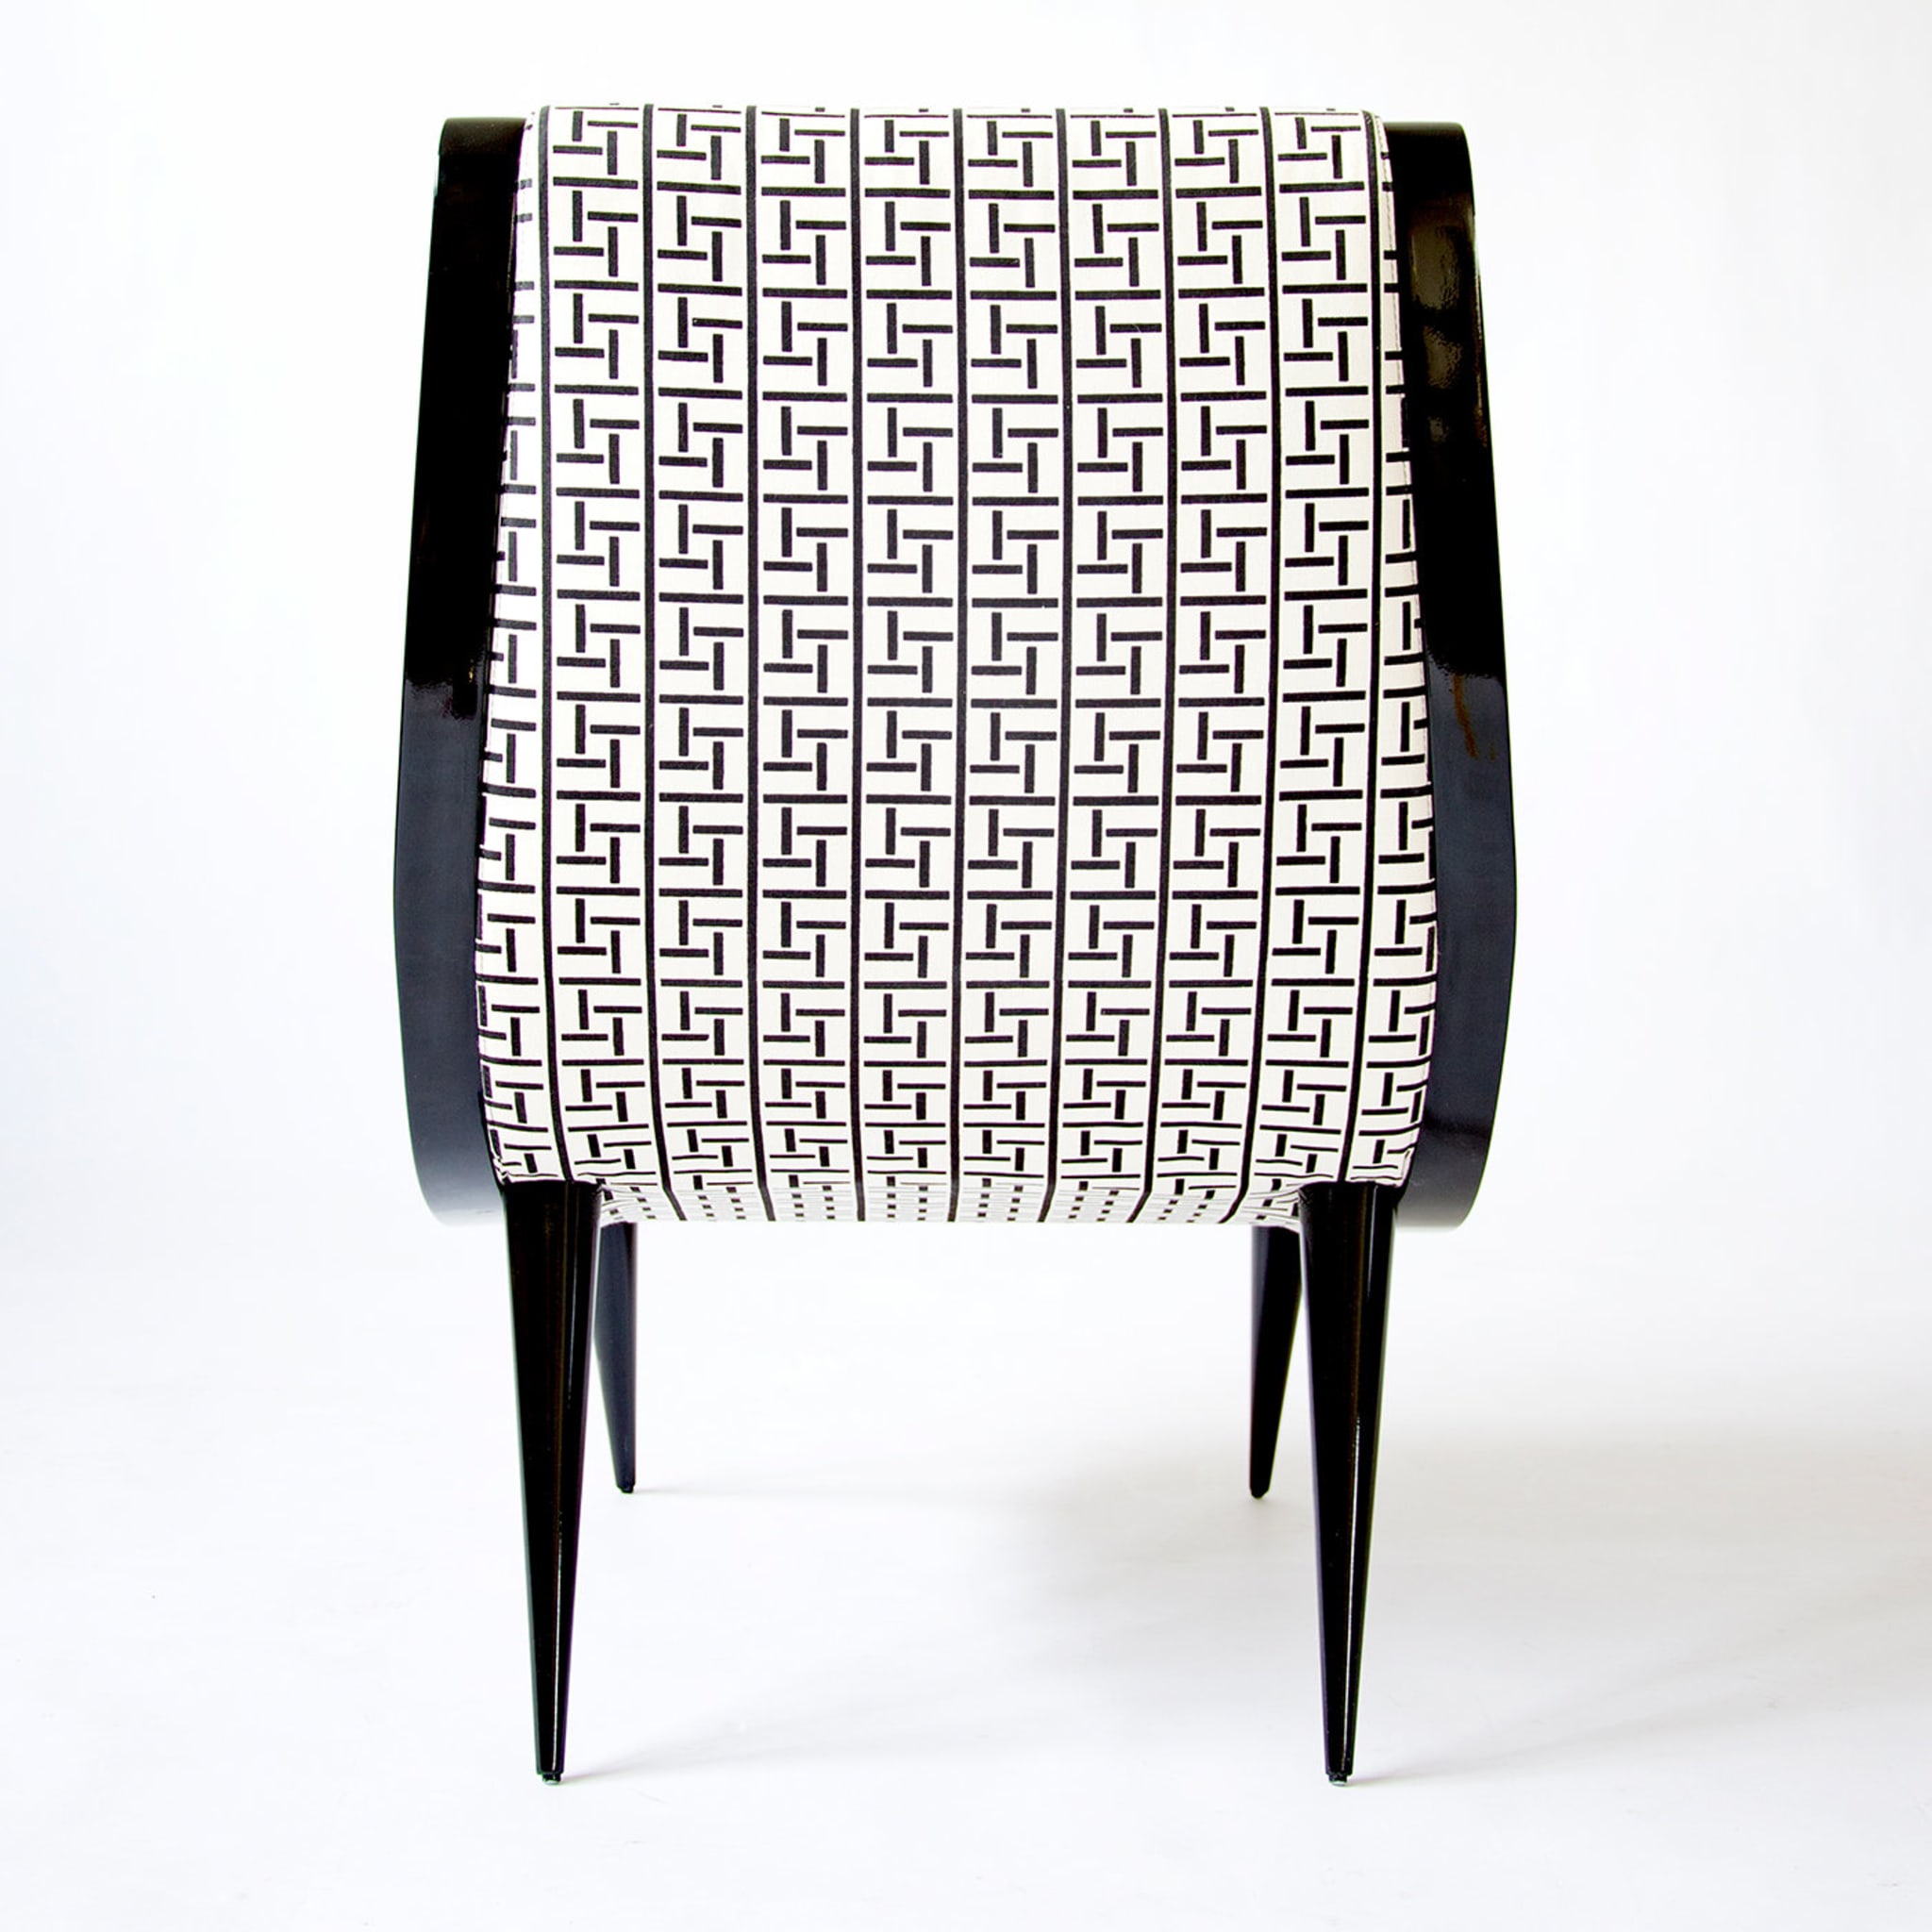 Eclipse armchair in black and white fabric - Alternative view 3